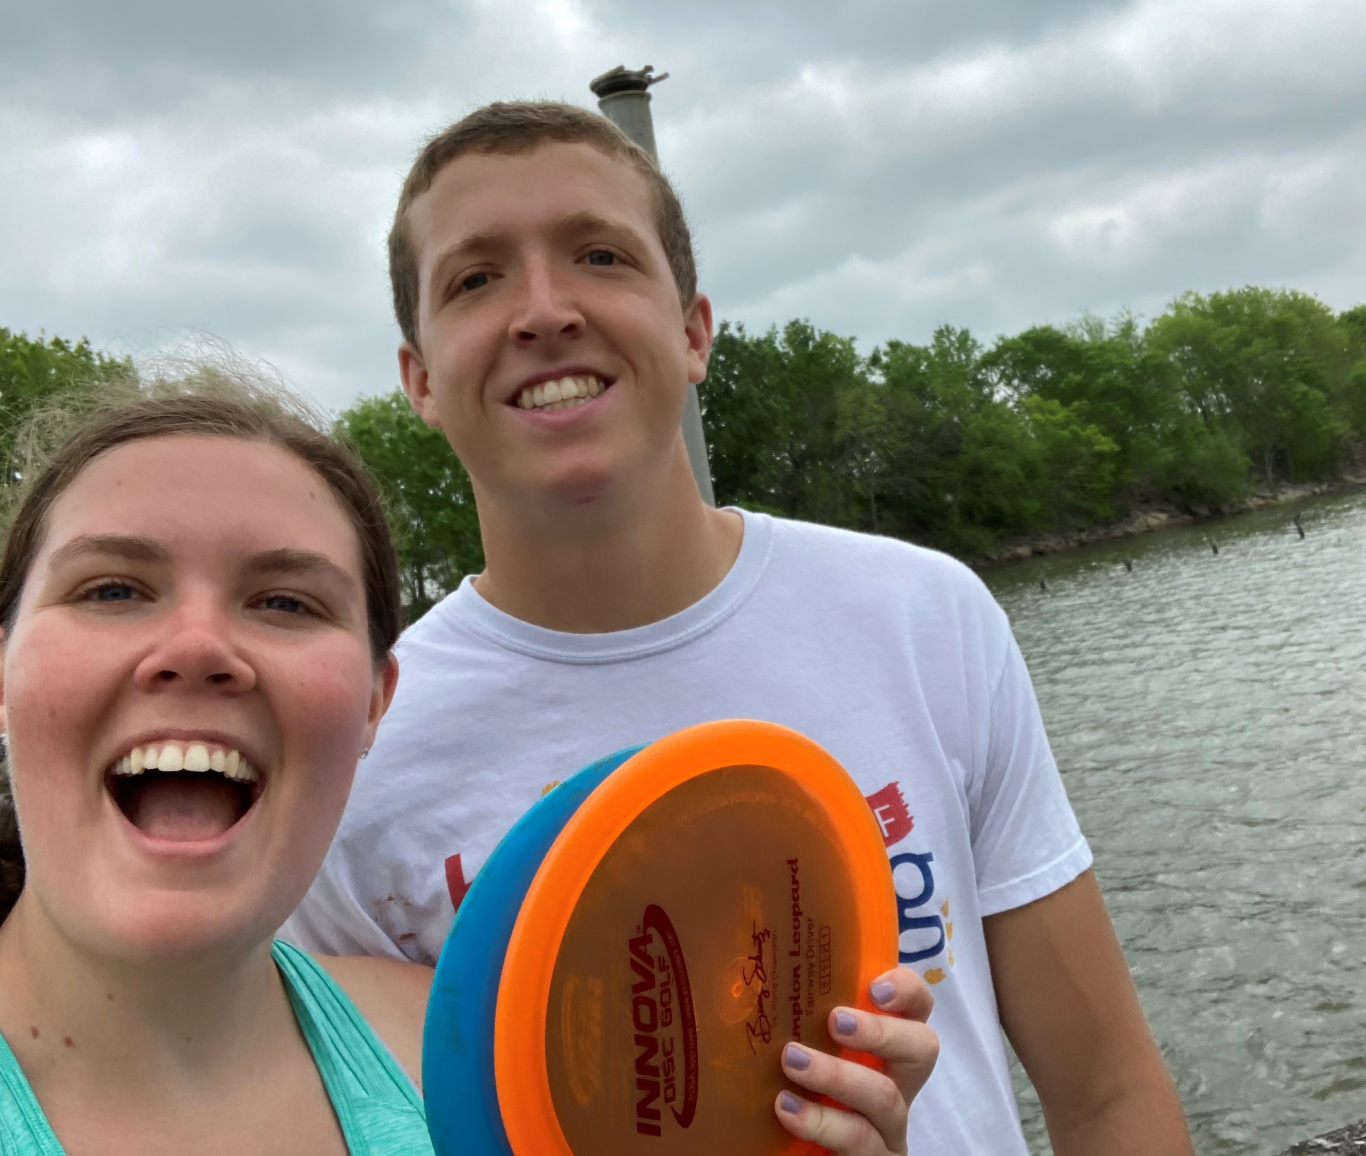 Matthew McConomy and his girlfriend playing disc golf